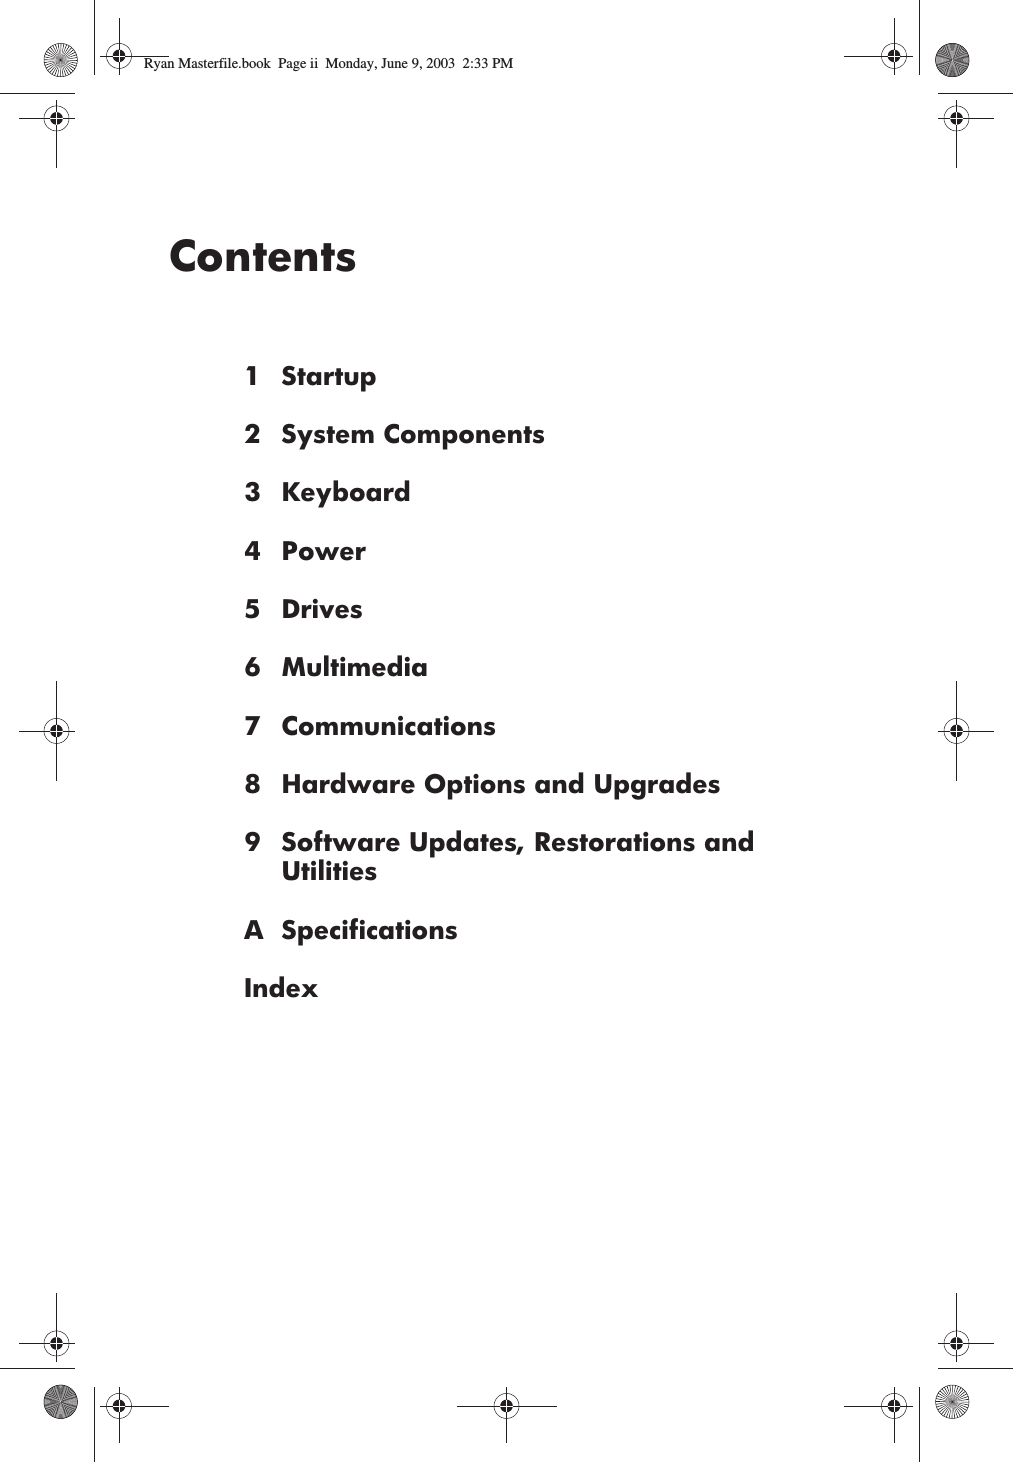 Contents1Startup2 System Components3 Keyboard4Power5 Drives6 Multimedia7 Communications8 Hardware Options and Upgrades9 Software Updates, Restorations and UtilitiesA SpecificationsIndexRyan Masterfile.book  Page ii  Monday, June 9, 2003  2:33 PM